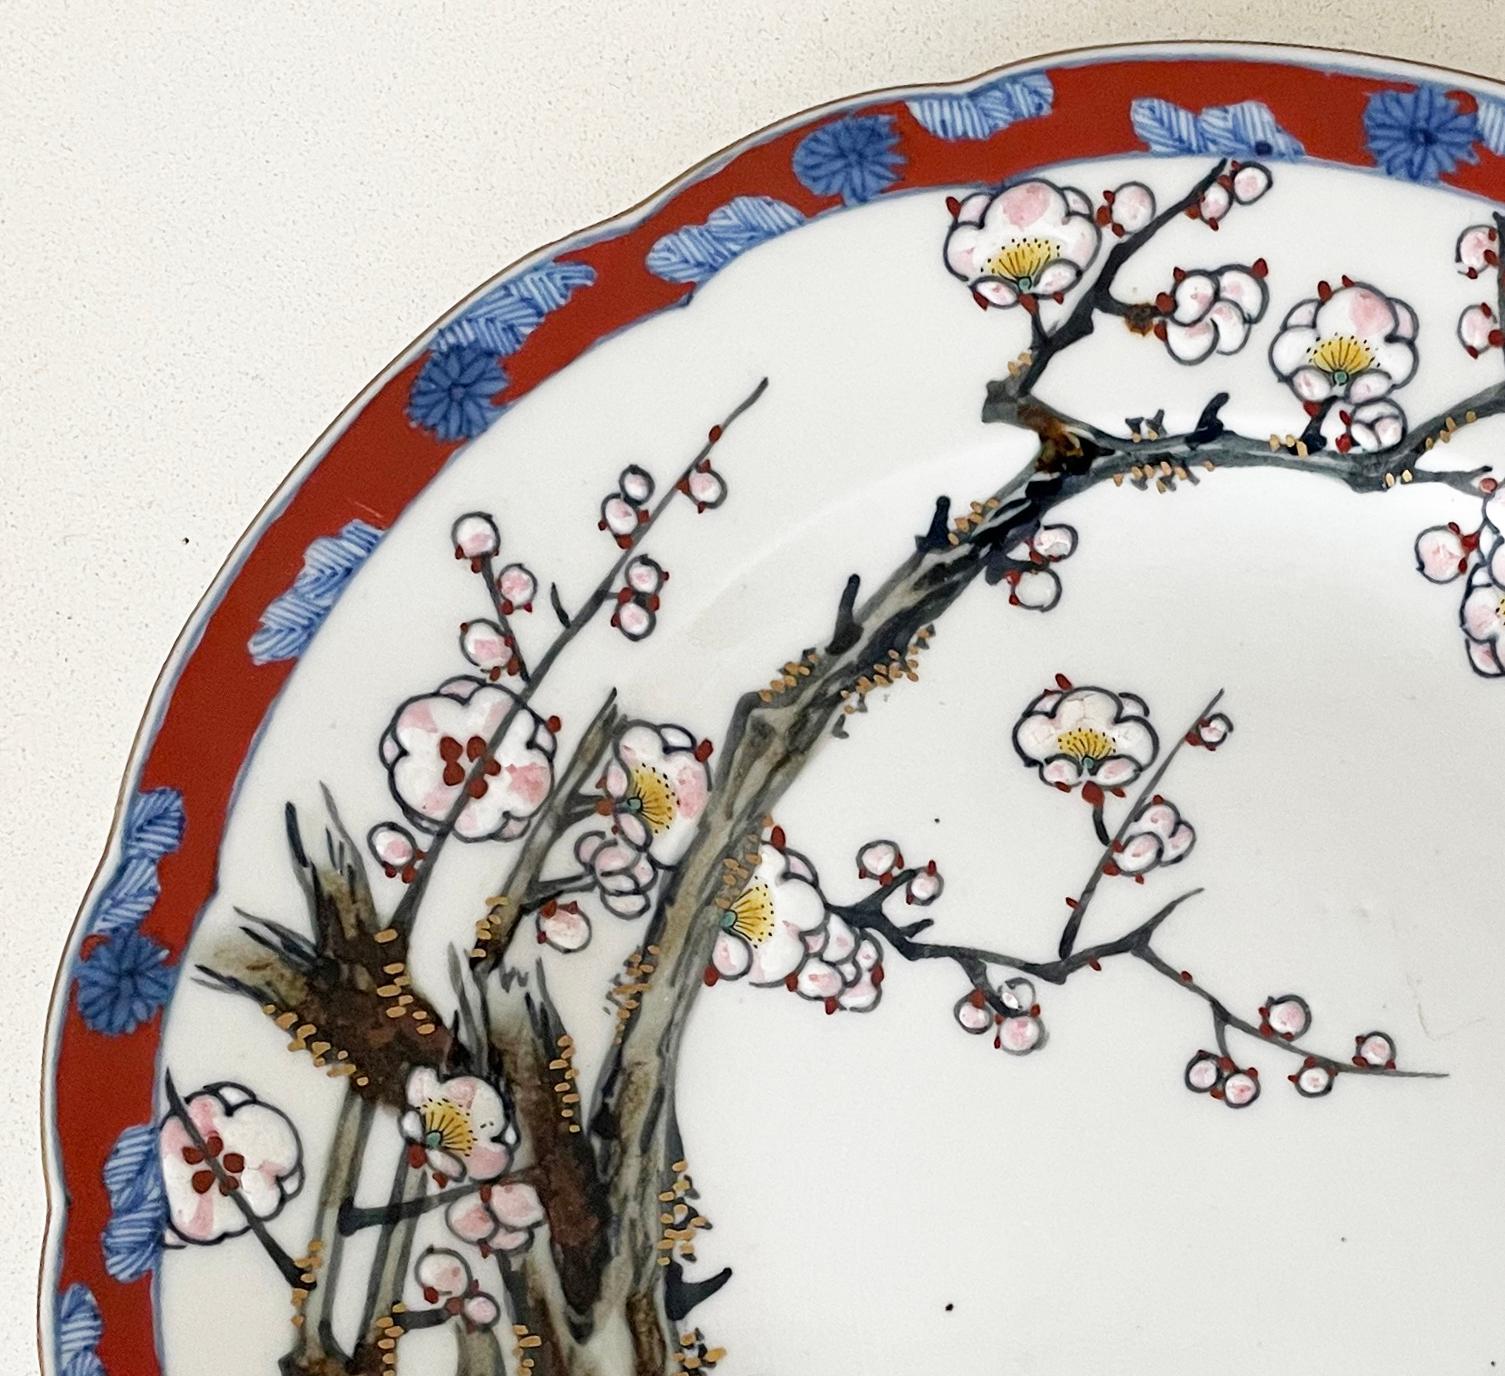 A beautiful Japanese plate with lightly fluted edges, decorated with flowering cherry blossom and two swifts in flight. With a vibrant red outer border decorated with flowers. In very good condition with no chips or cracks and minimal wear, dating